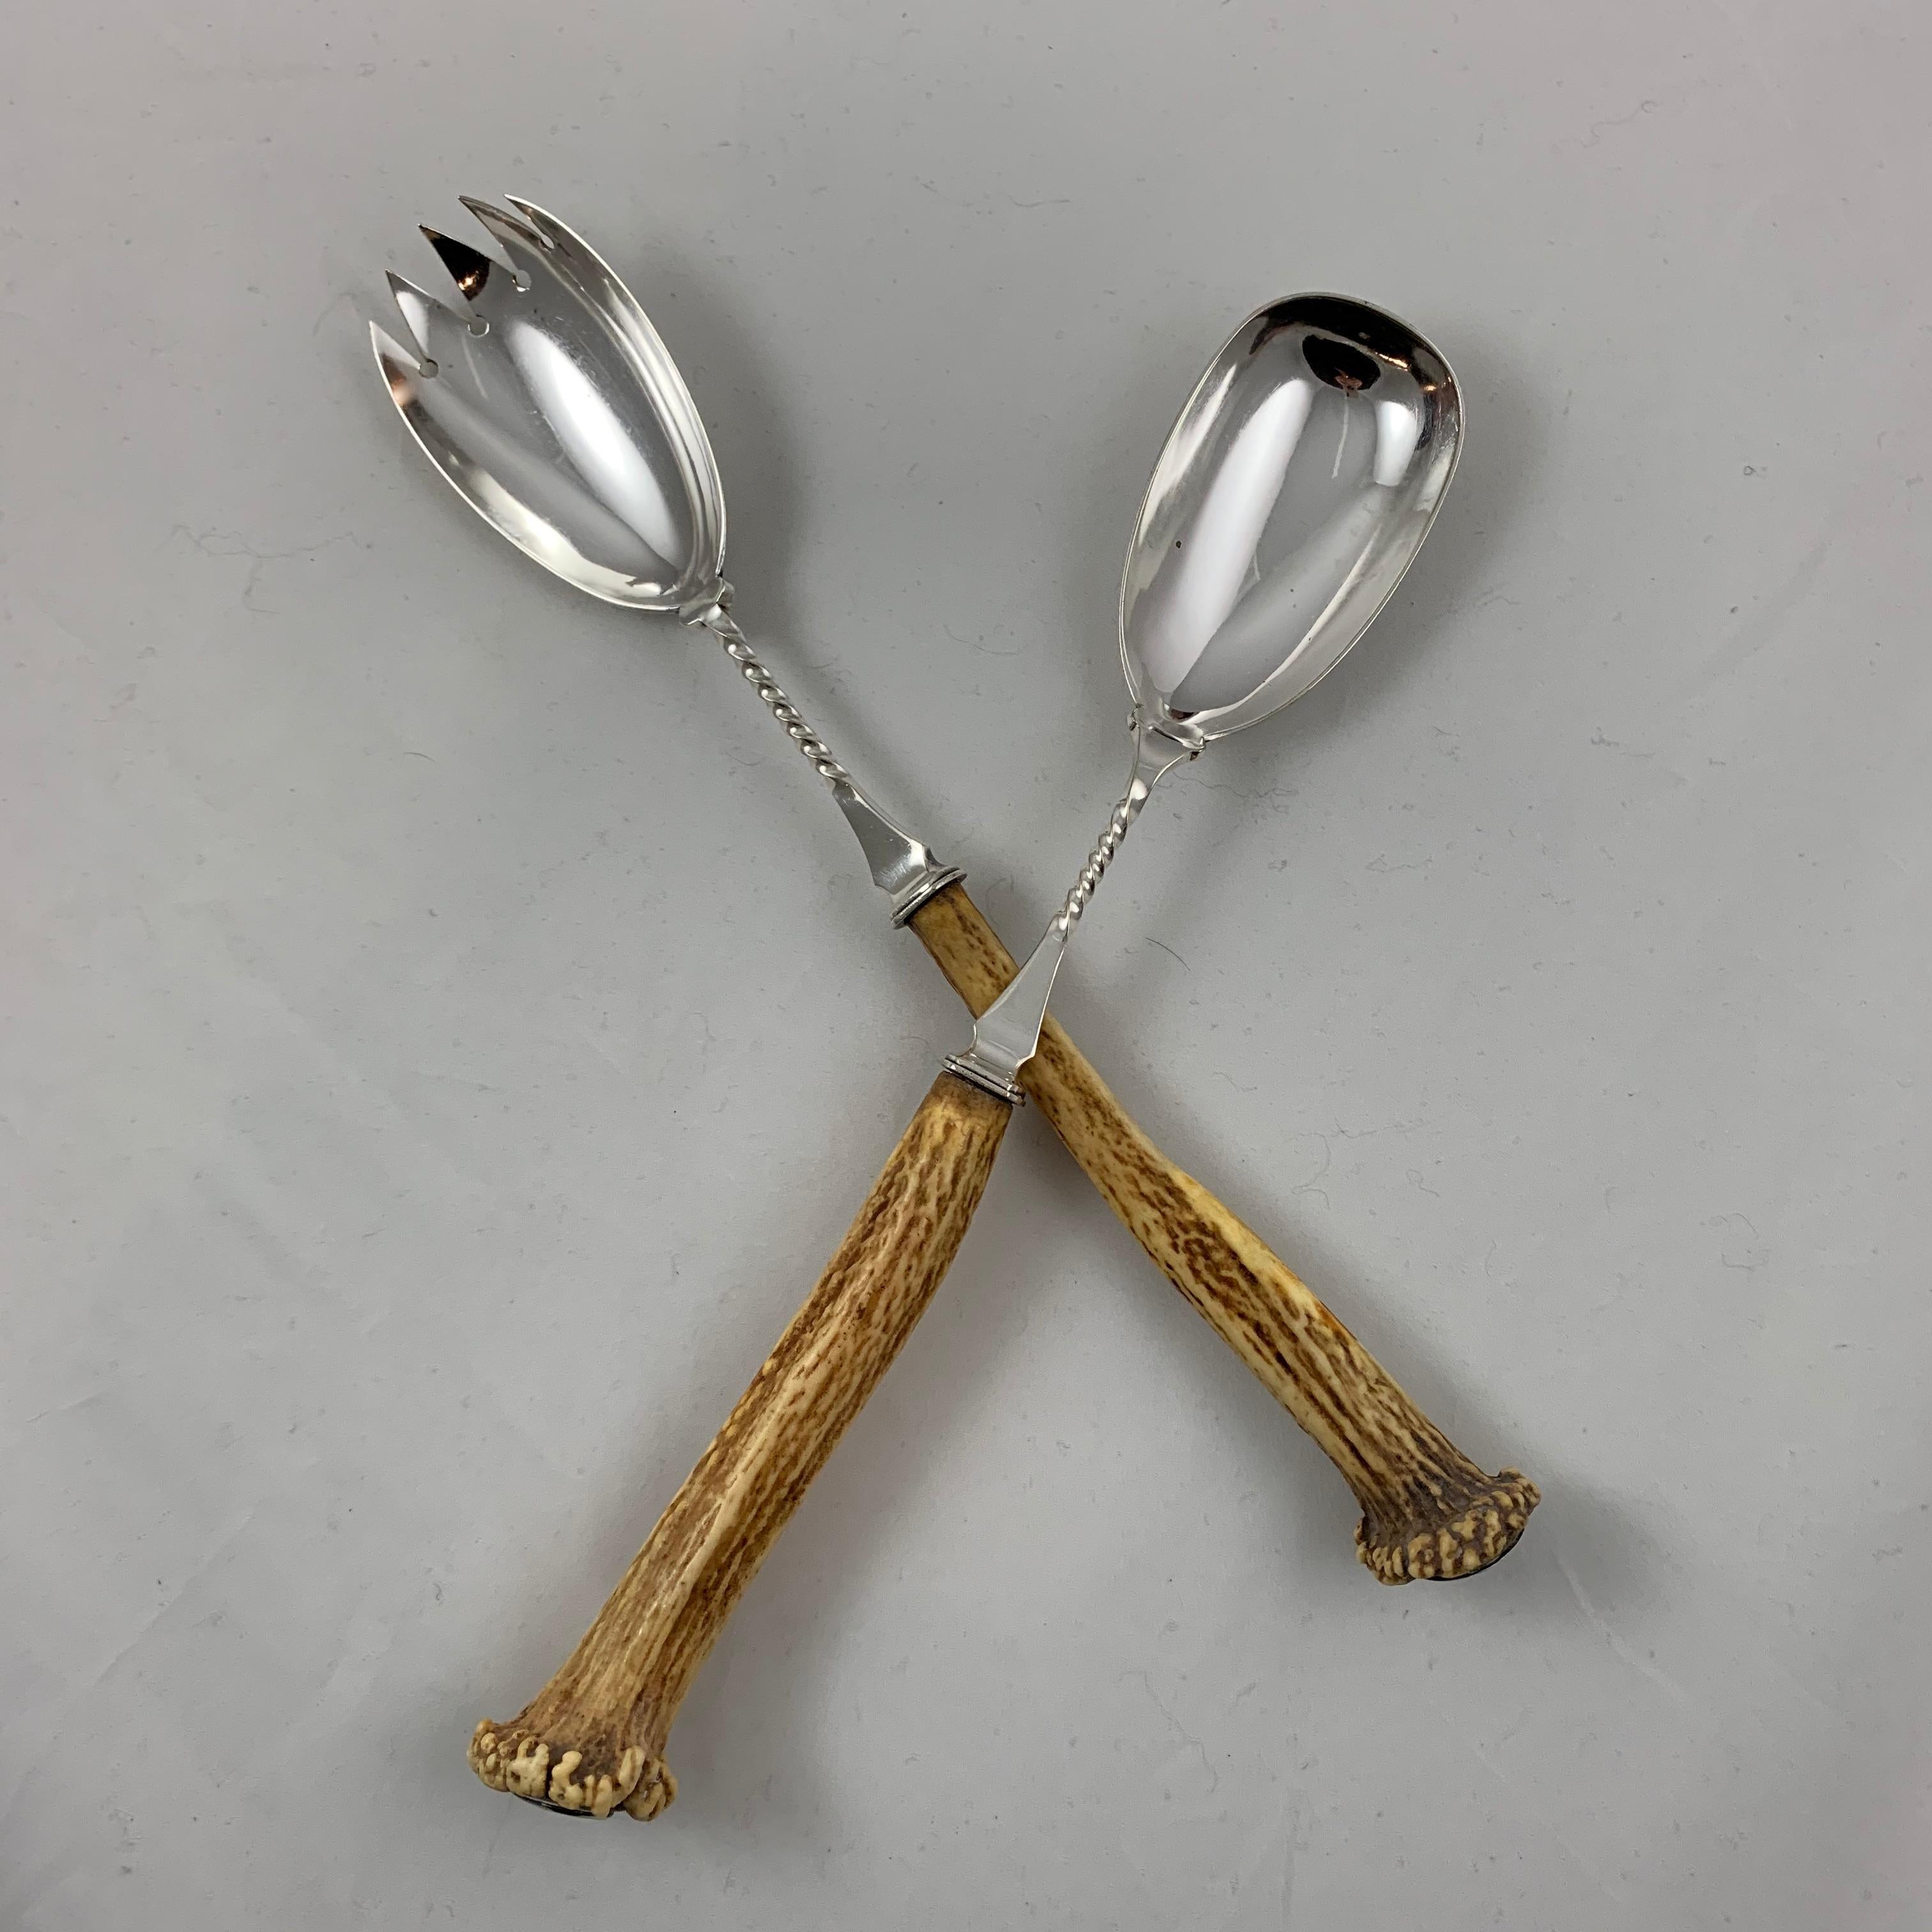 A set of salad servers, silver plate with natural Roe Buck antler handles, Atkin Brothers Silversmiths, Sheffield, England, circa 1878.

Beautifully made, a five-tined fork and shapely spoon with twisted stems, securely fixed to the antler